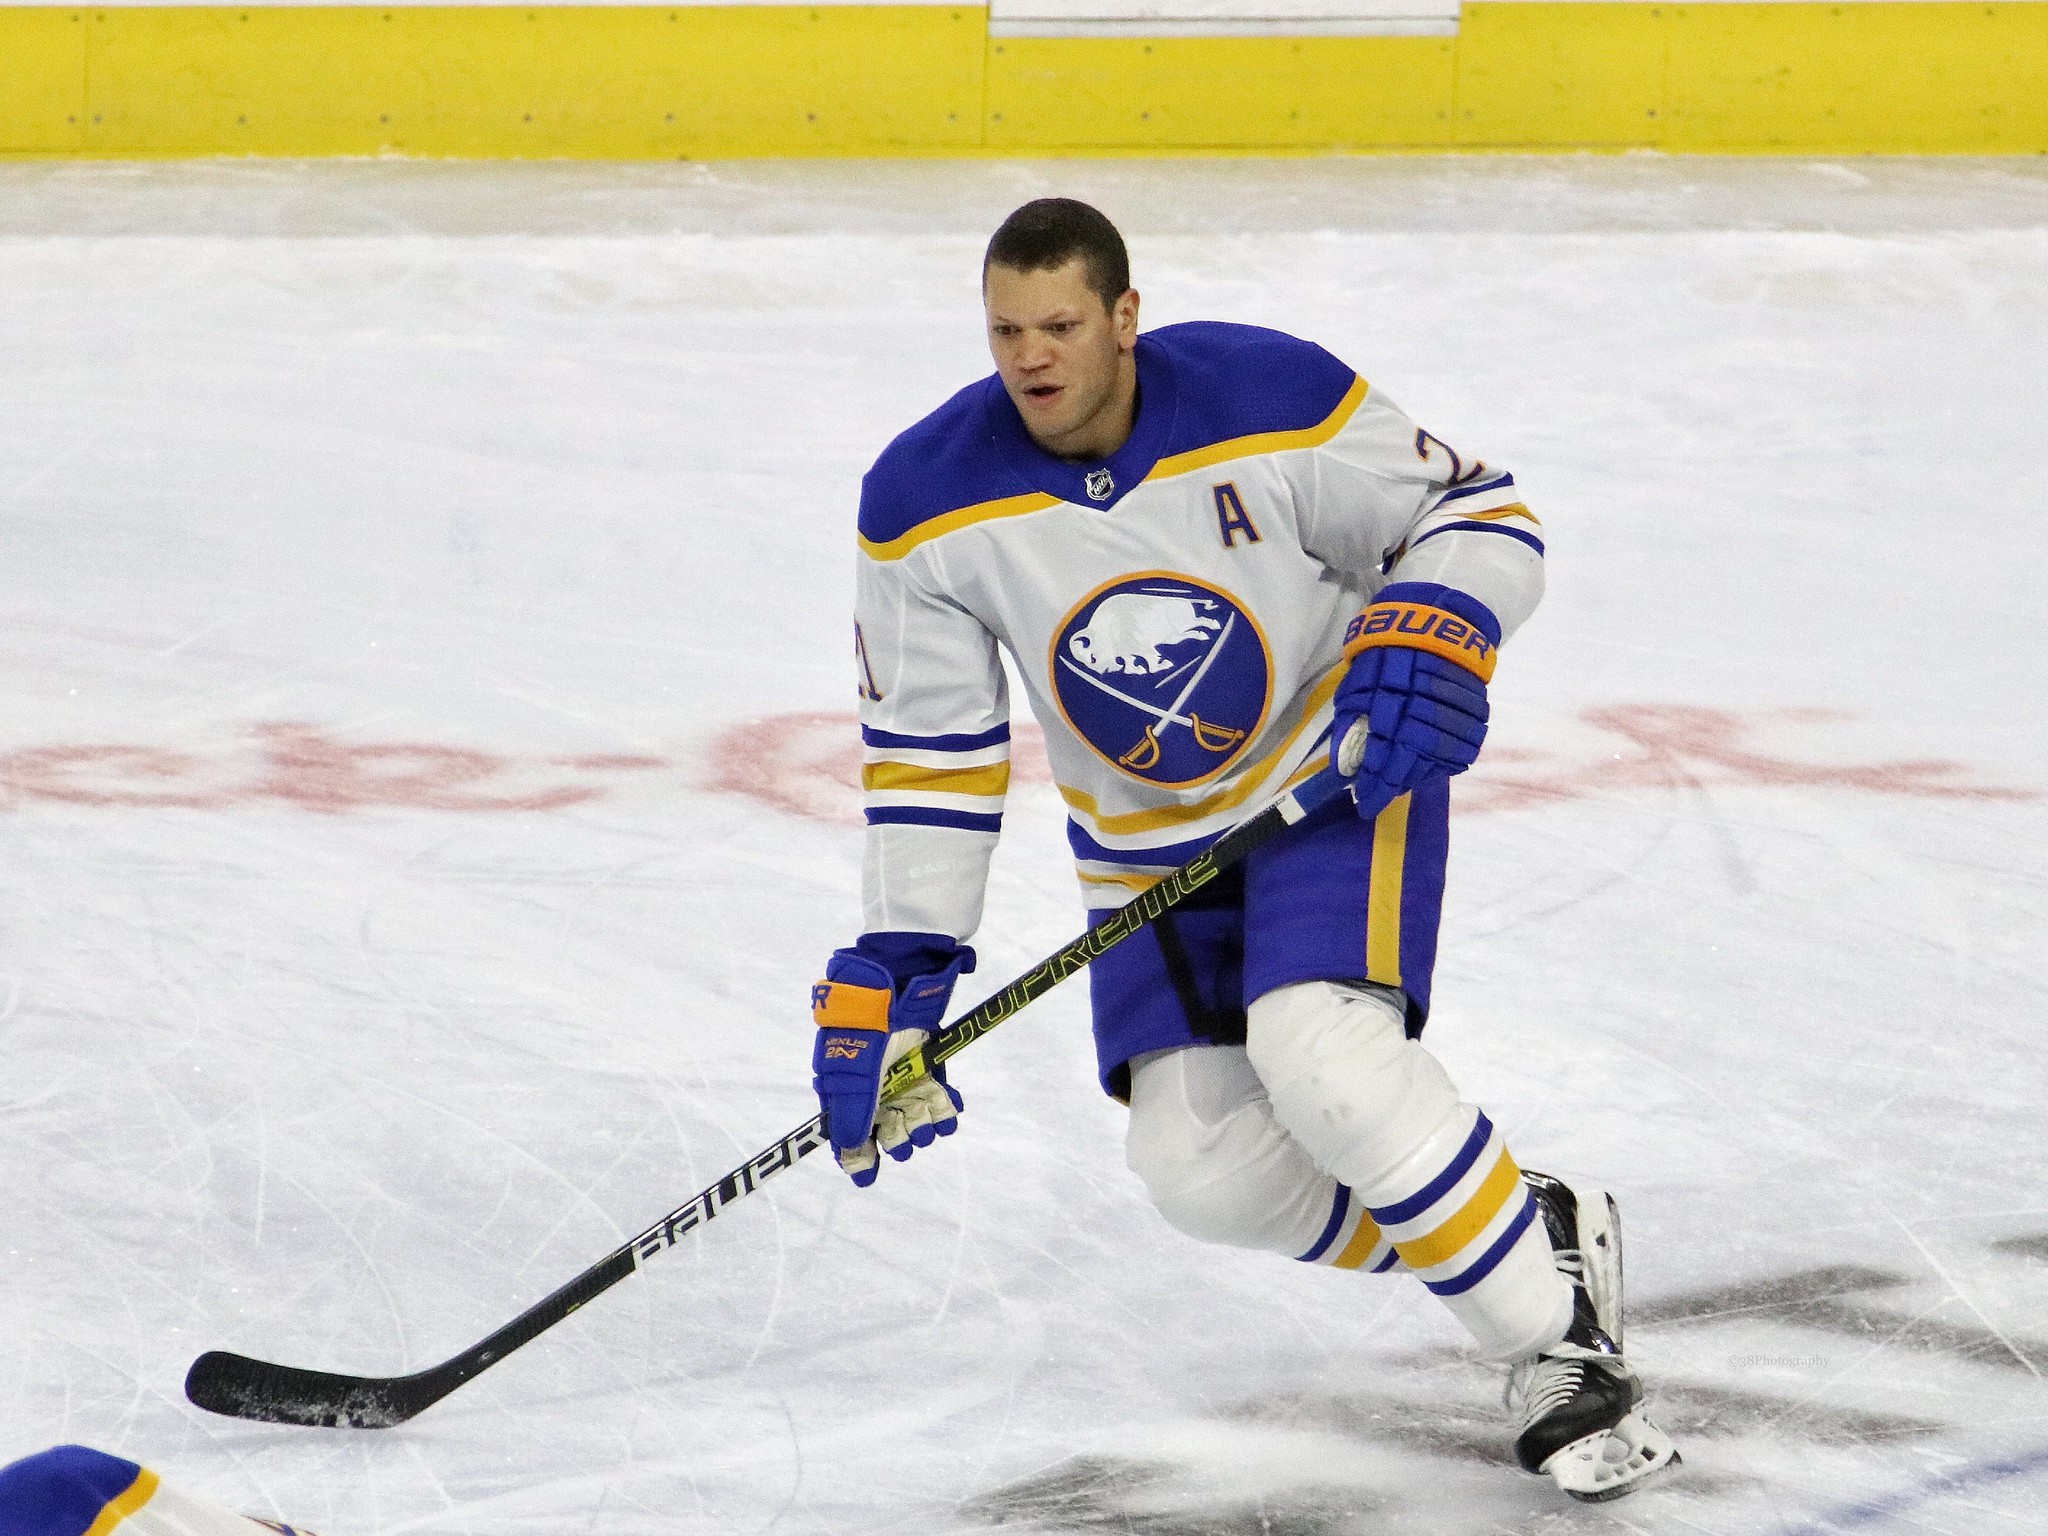 One-on-One With Kyle Okposo